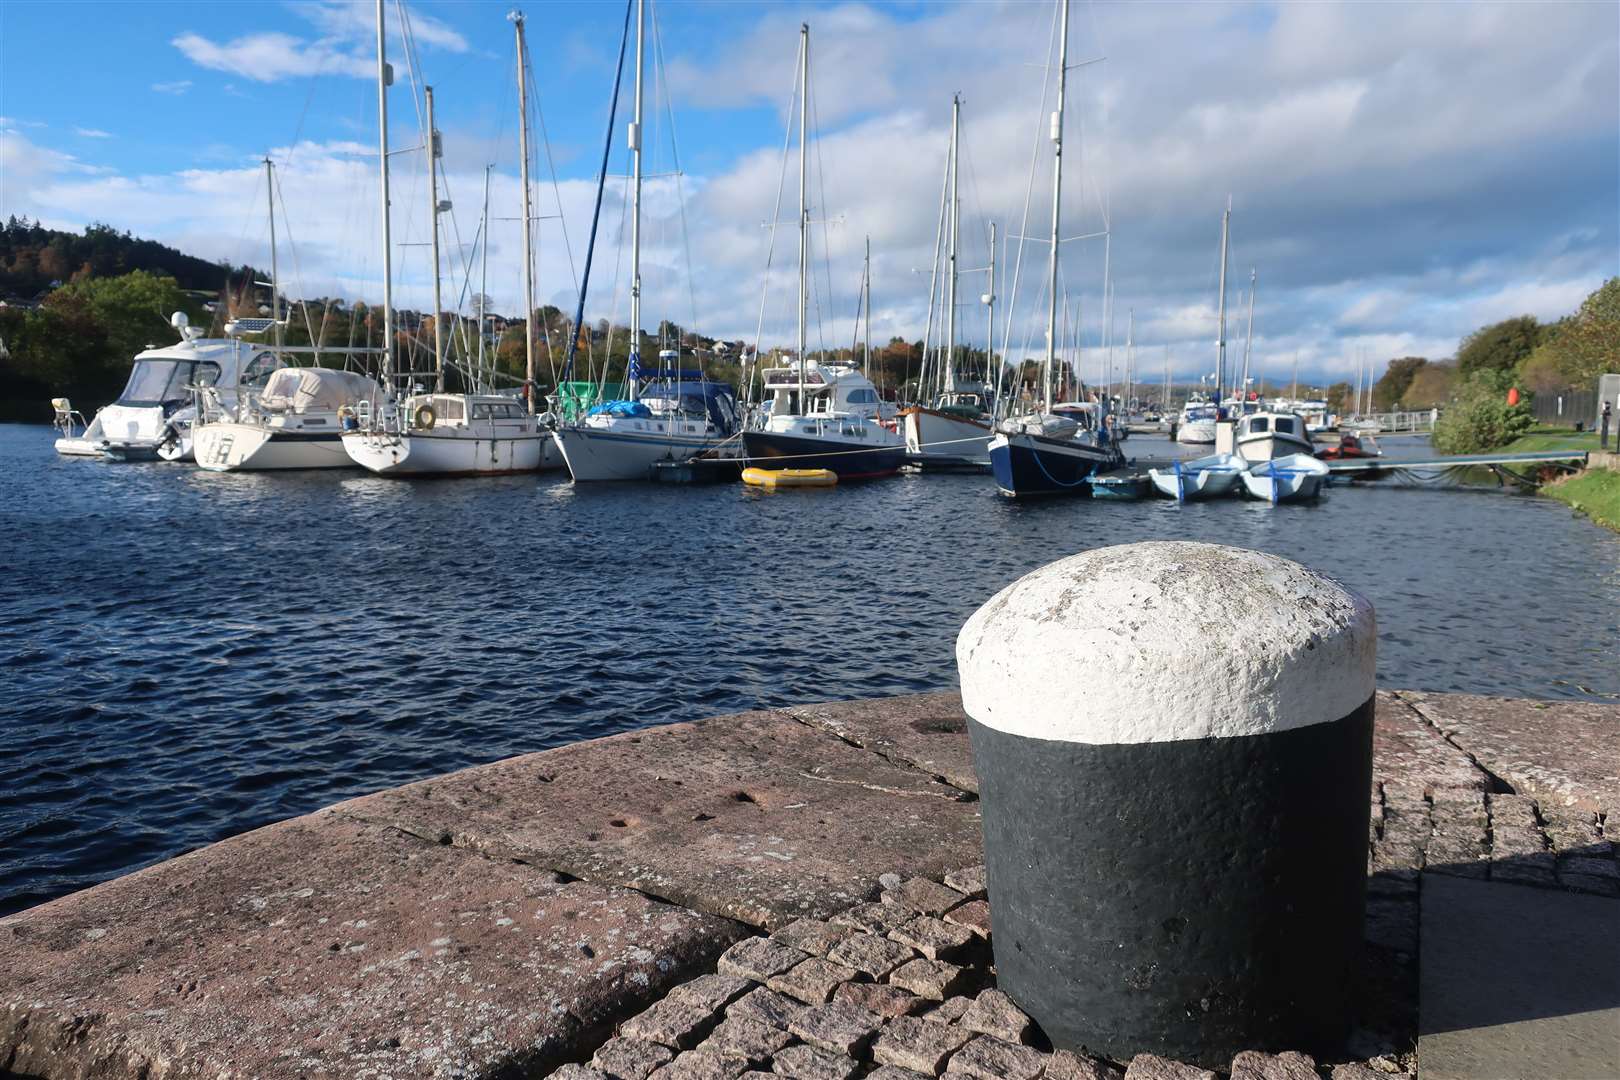 The marina at the historic Muirtown Basin in Inverness.